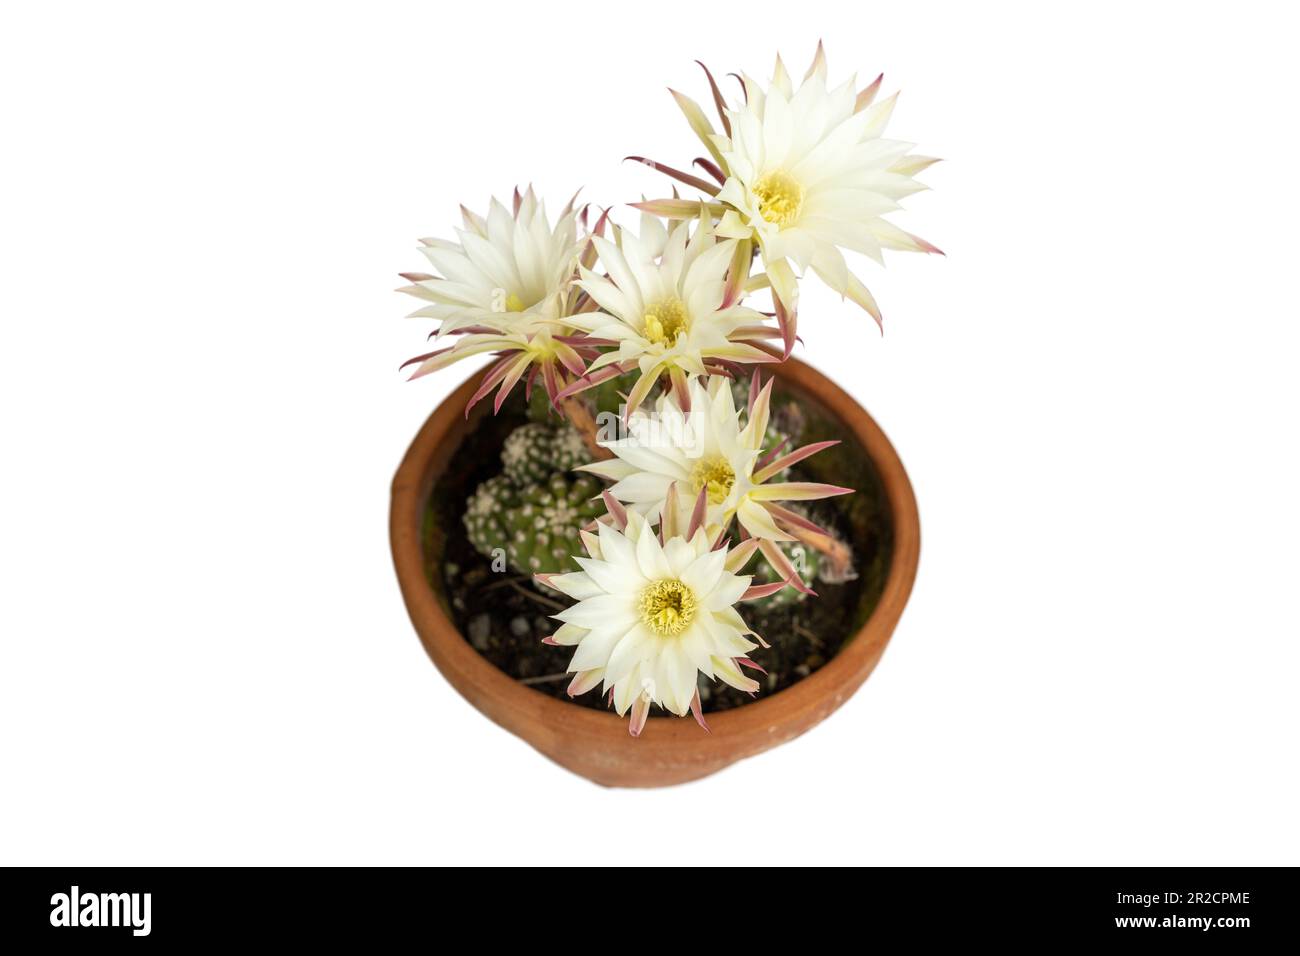 Flowering cactus in a clay pot isolated on white background Stock Photo